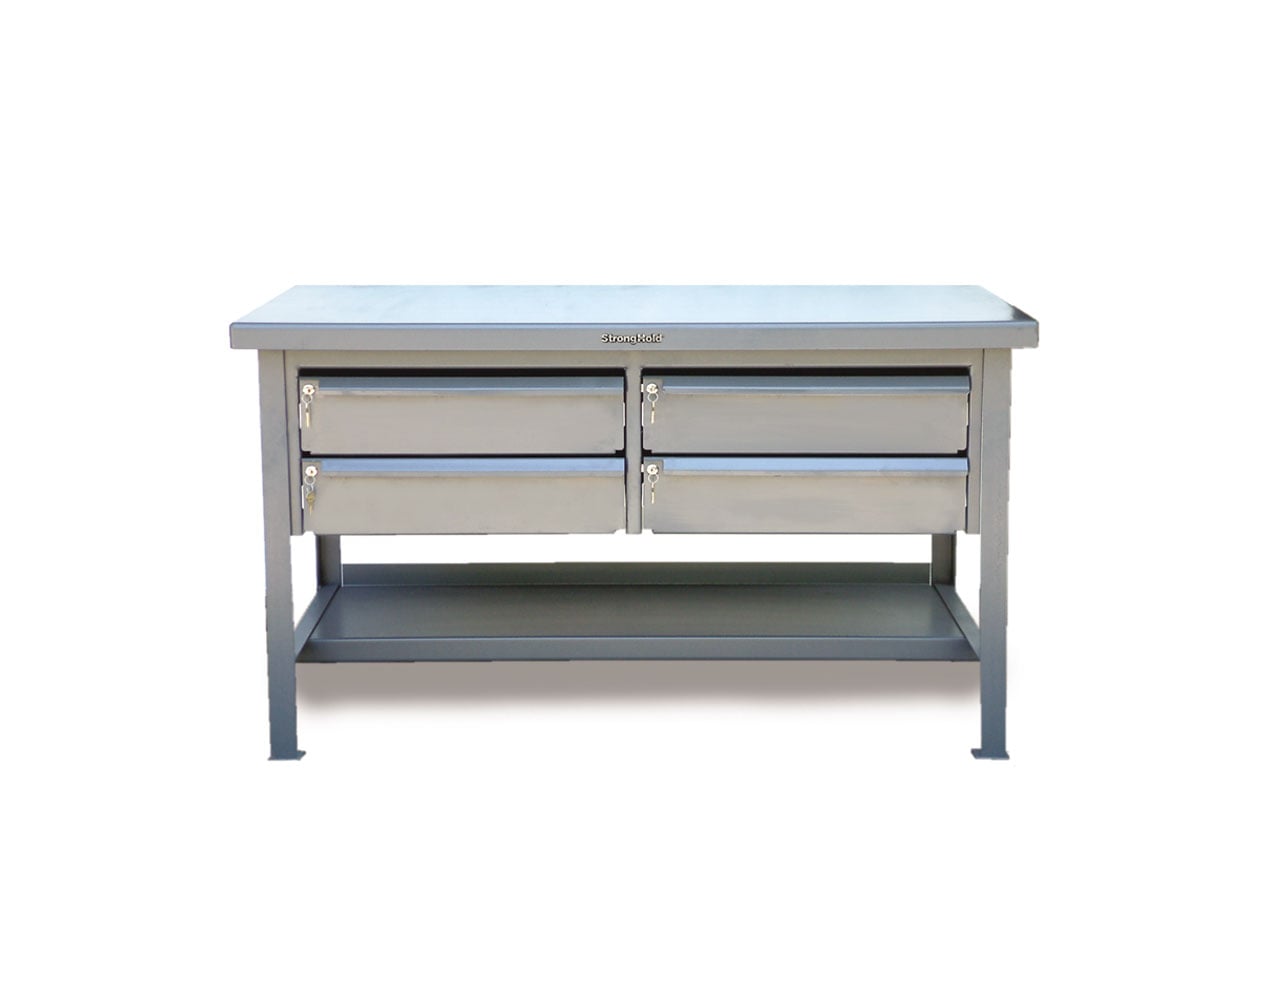 Extreme Duty 7 GA Shop Table with Stainless Steel Top, 4 Keylock Drawers, 1 Shelf - 60 In. W x 36 In. D x 34 In. H